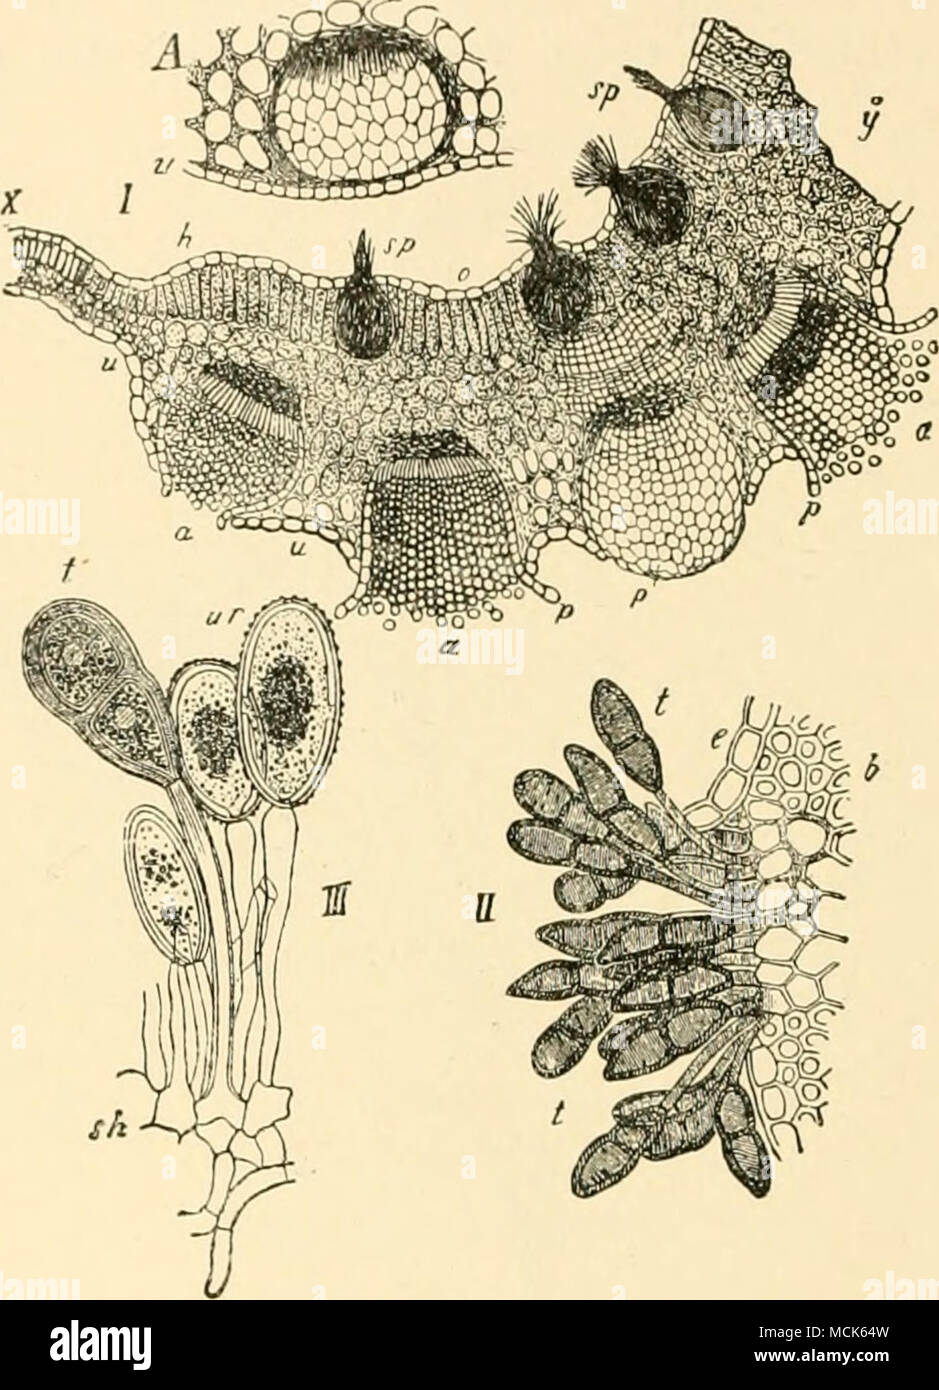 . Fig. 18i.âPuccinia graminis. A, Portion of transvei-se section of leaf of Bcrberis vulgaris, with a young aecidinm under the epidermis, v.. I. Section through an aecidium-bearing spot of a Barberry leaf. At x the normal structure and thickness of the leaf is shown, the portion u to p is abnormally thickened ; It to o, upper siirfaco of the leaf; sp, pyenidia ; a, aecidia , sectiu a peridinui (â |Â»i-(-l in -u: ^11. Matmv t^l. i, . 1 in. TclcUlos'l..,,. '.', ;,ll at its apex, the urcdcsjH (After l)e Bary, from Sach's Lehrbuxh.) -â¢idium marked p alone (without Â«) shows ly. mg through the ep Stock Photo